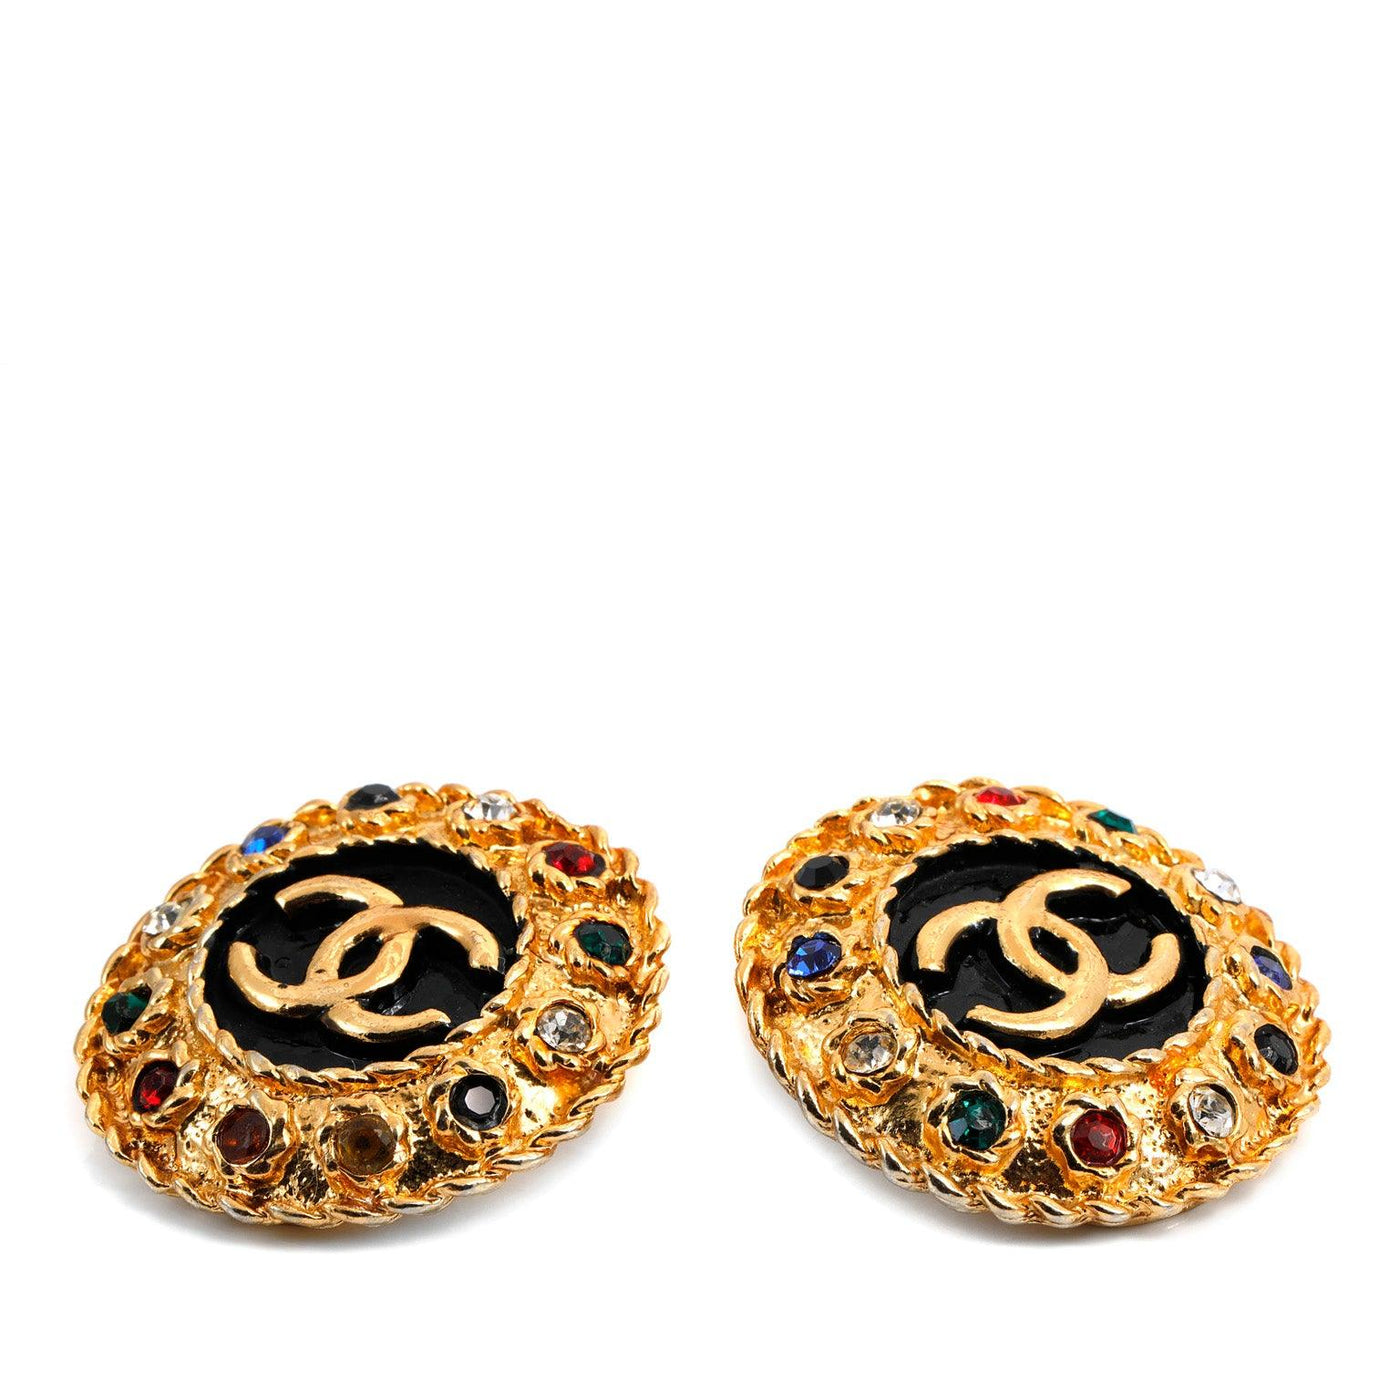 Chanel Black Enamel and Rhinestone CC Button Earrings - Only Authentics